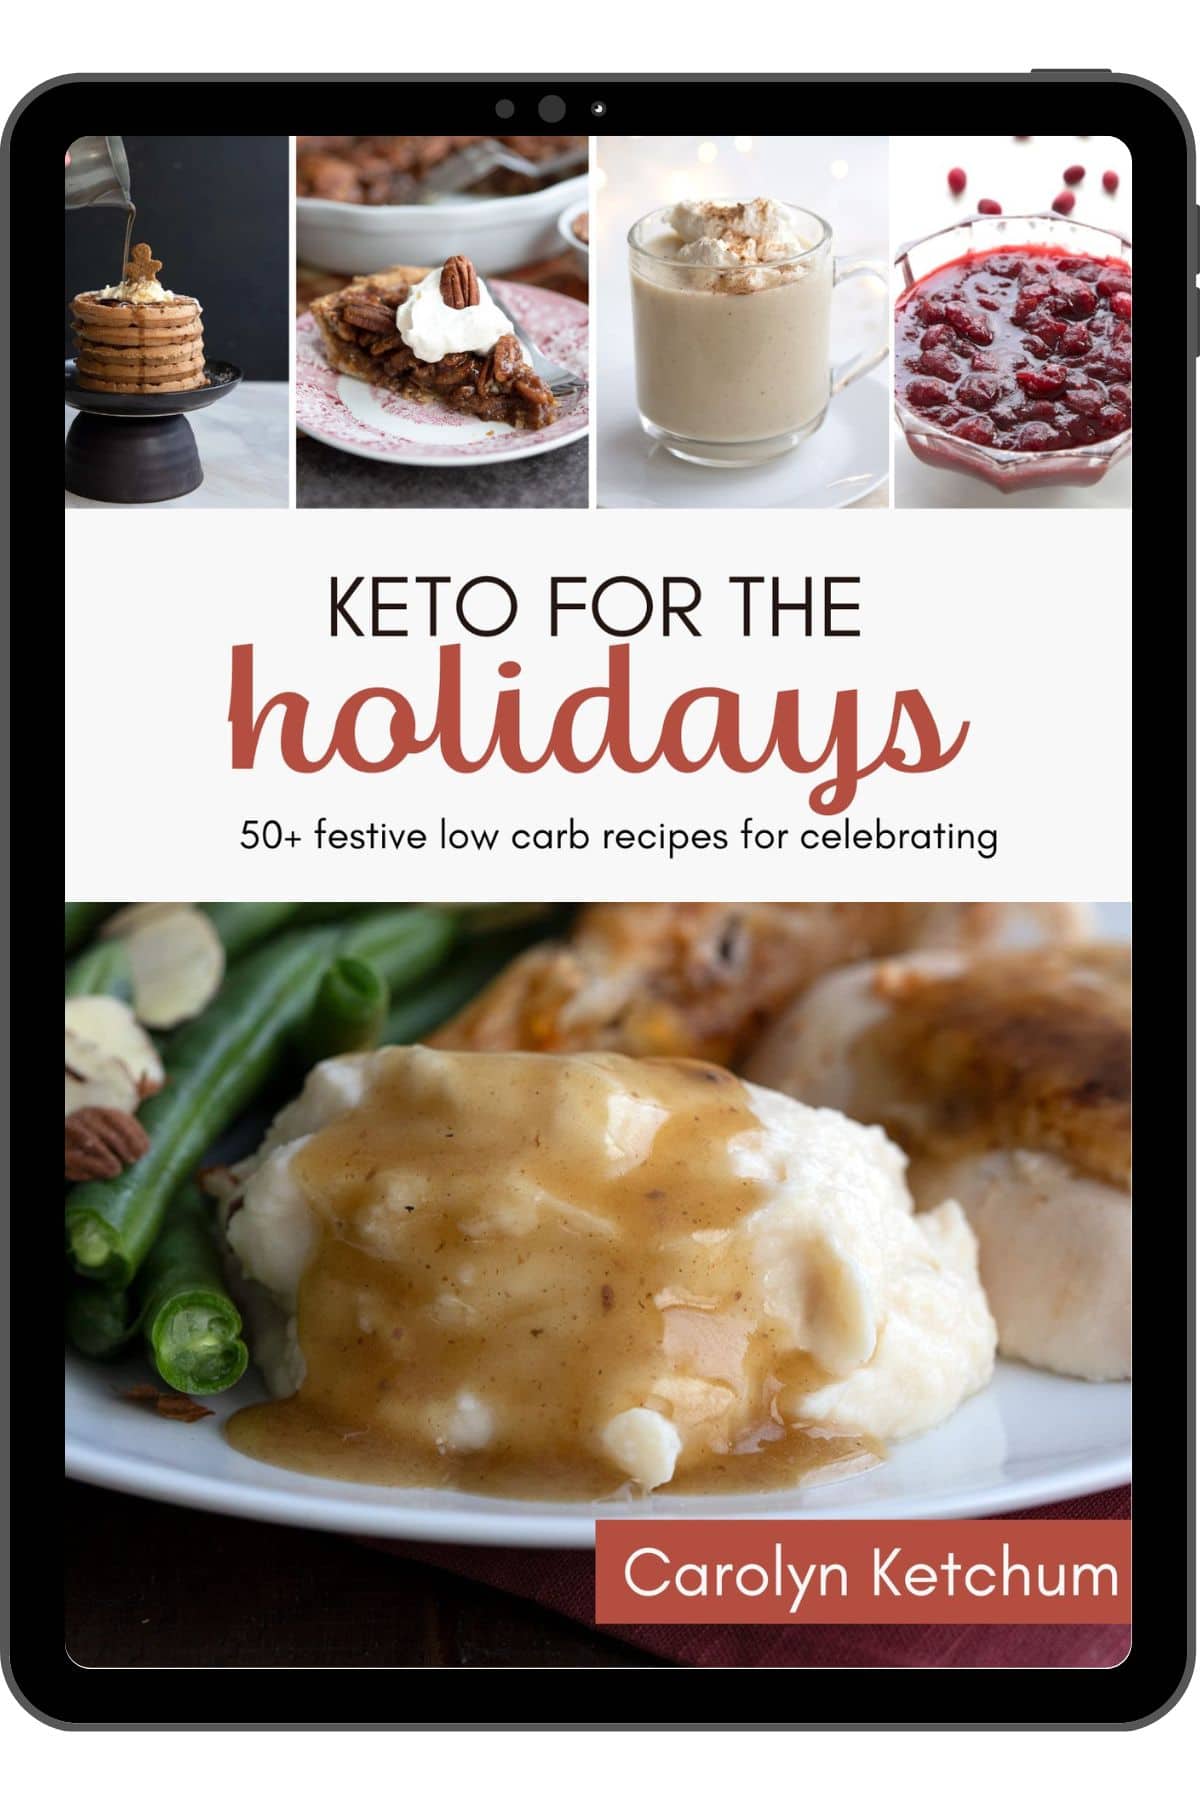 Cover image of Keto for the Holidays inside an iPad frame. 